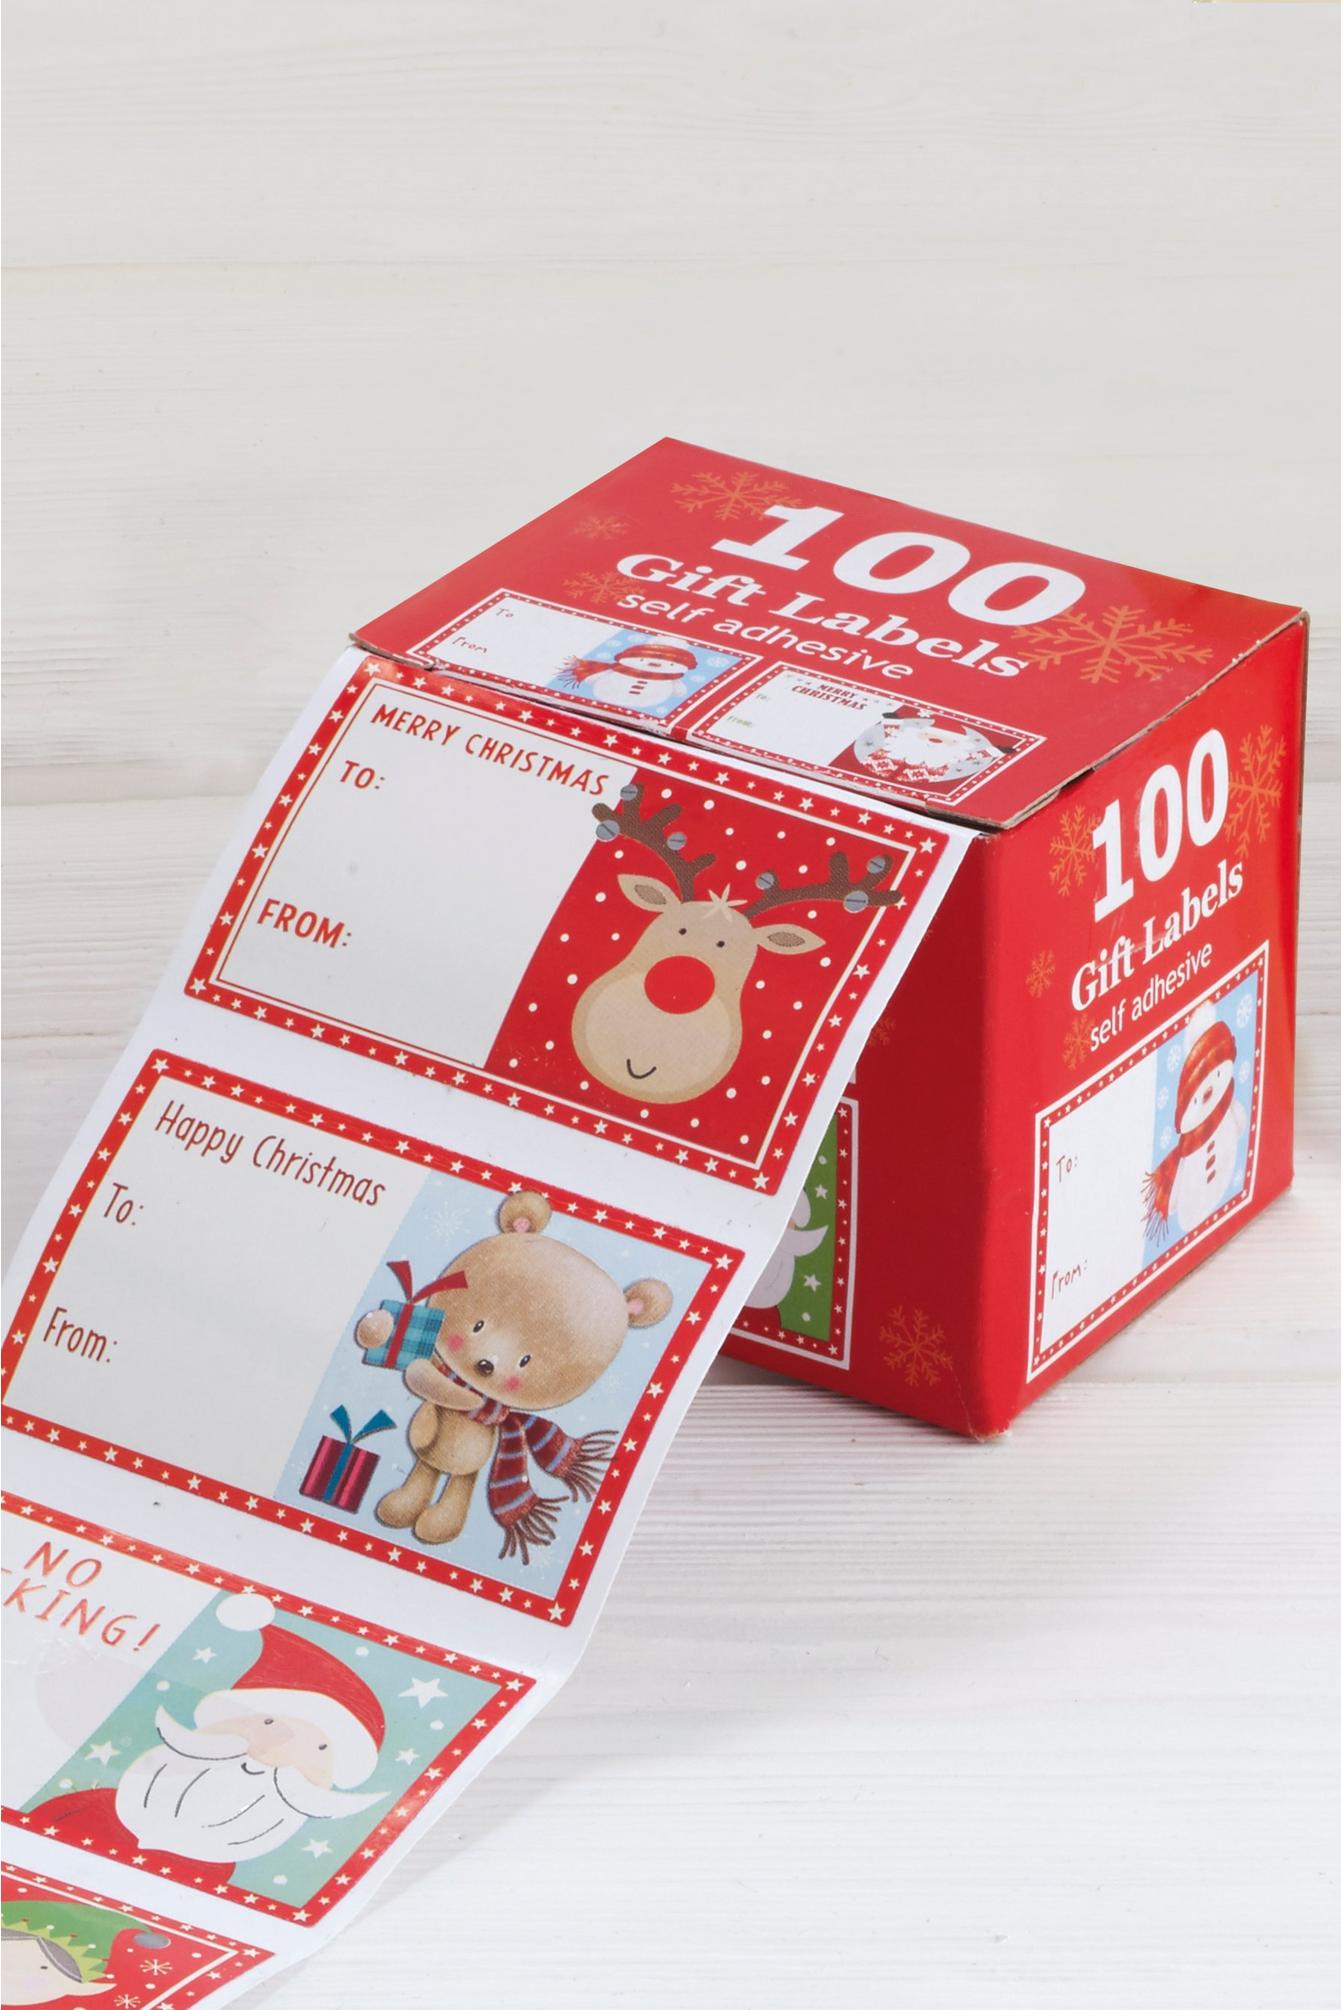 100 Sticky Christmas gift tags for only £1.99. Cheap tags and the price is simply amazing.